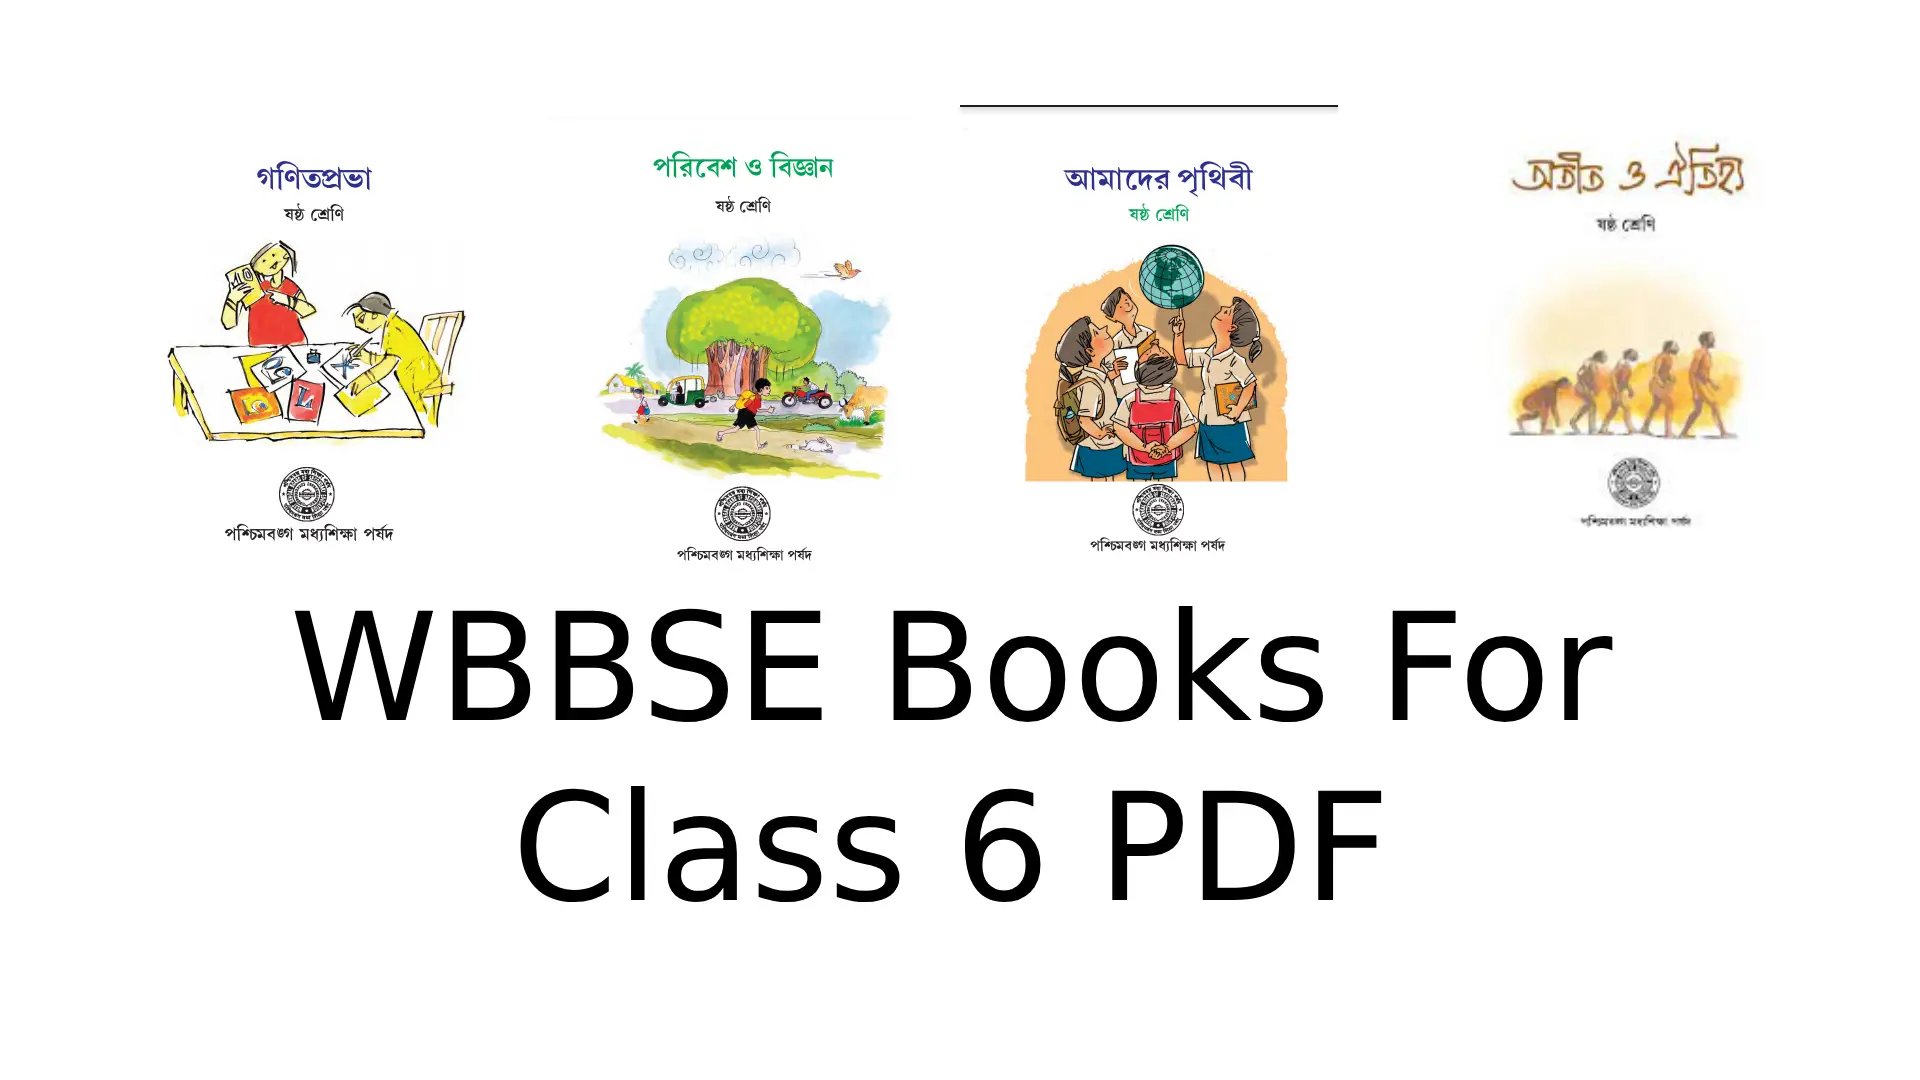 WBBSE Books For Class 6 PDF